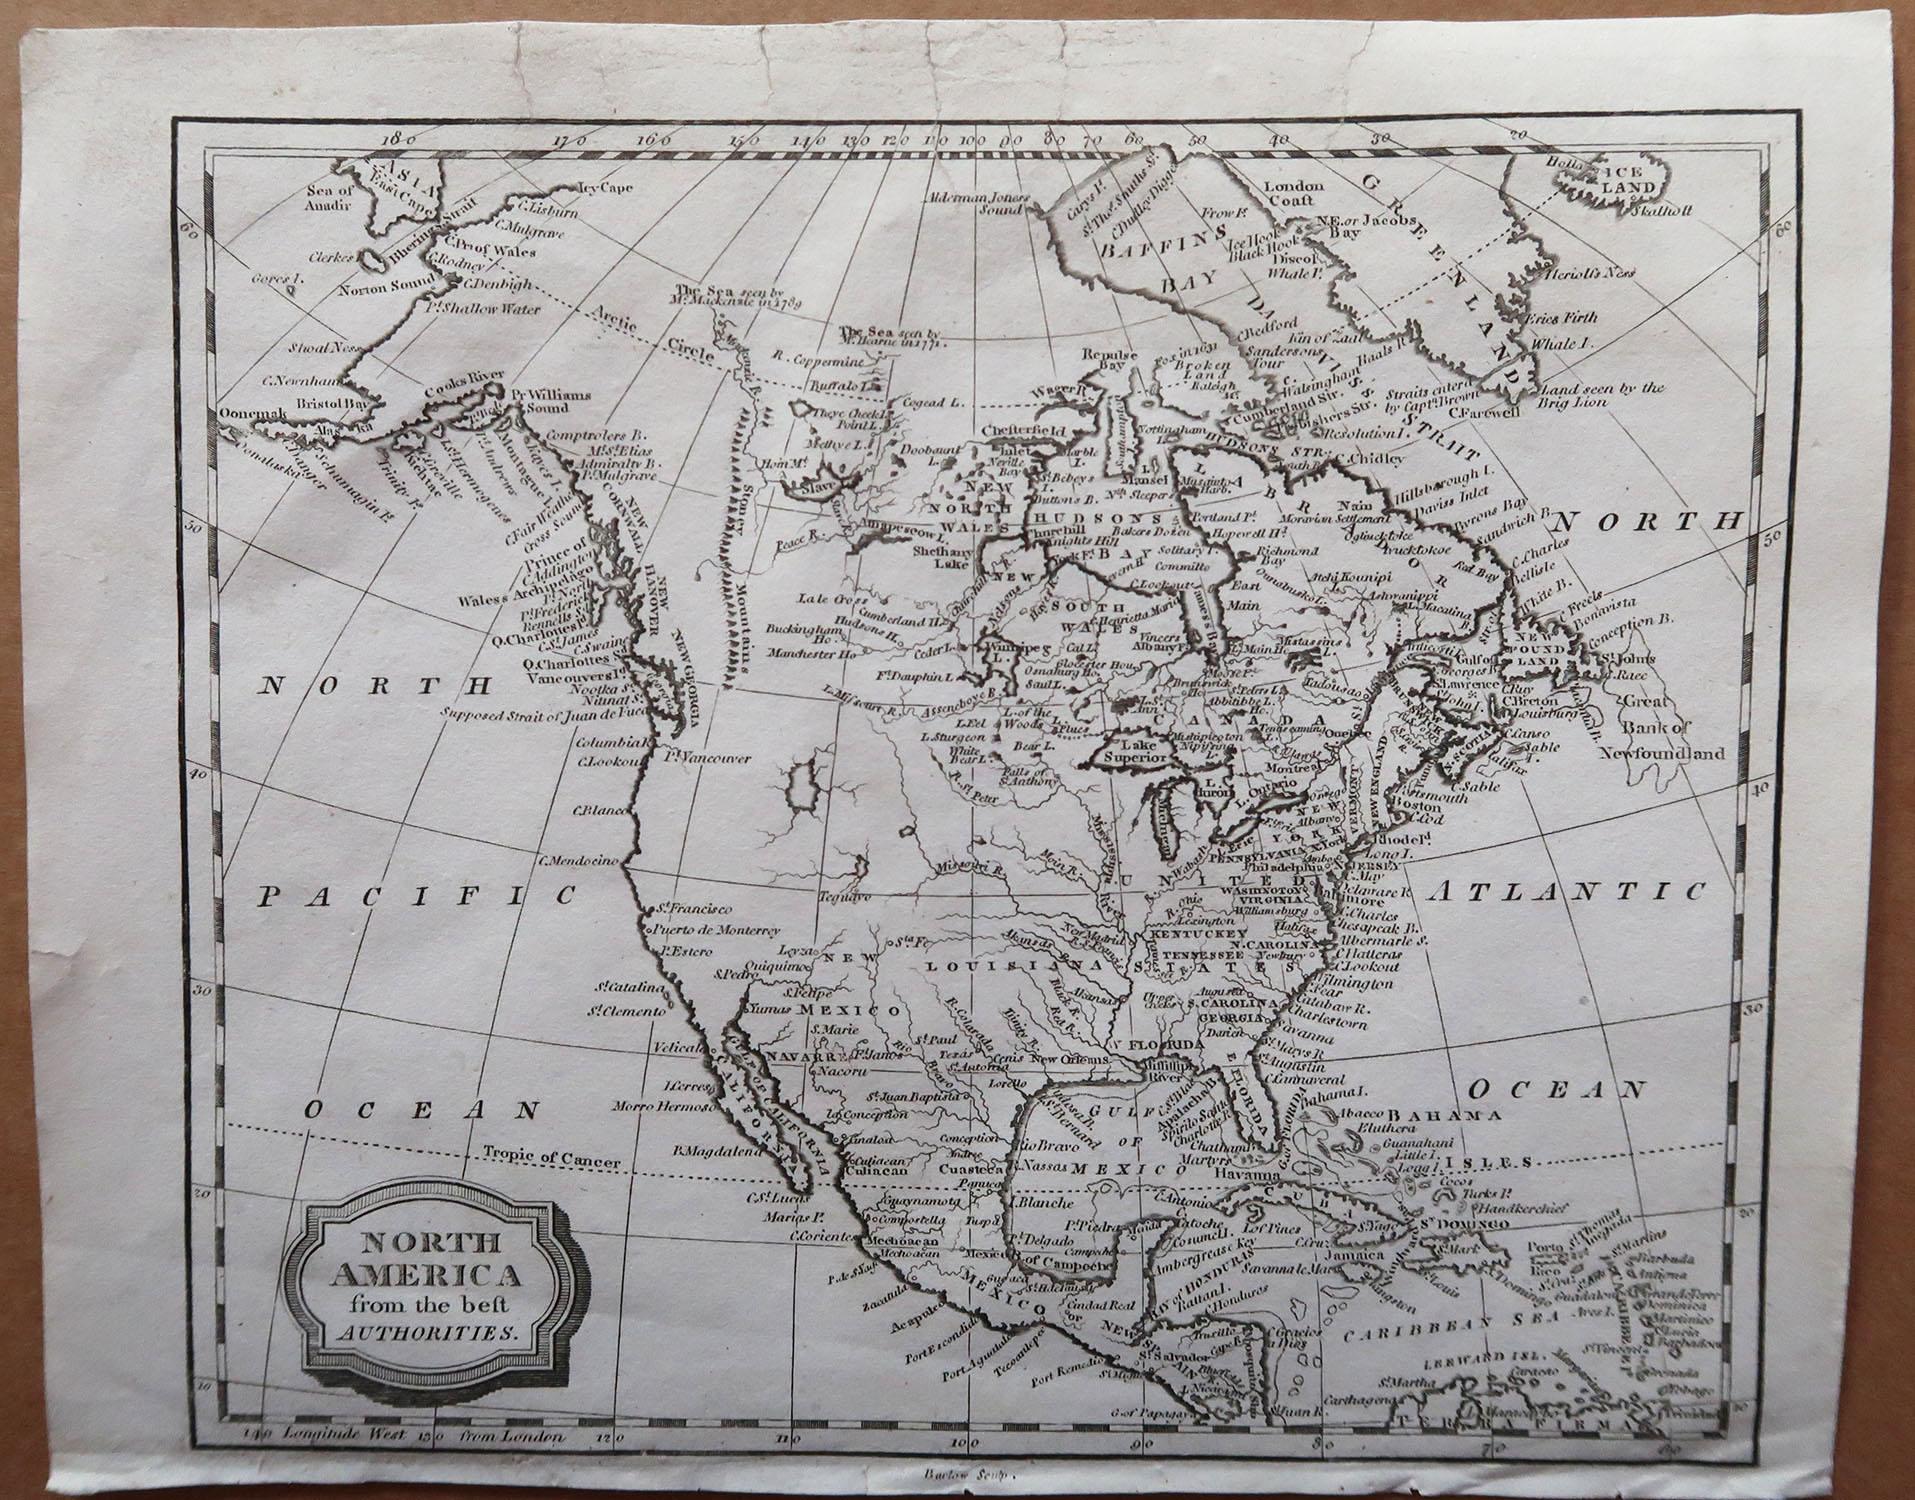 Other Original Antique Map of North America, Engraved By Barlow, 1806